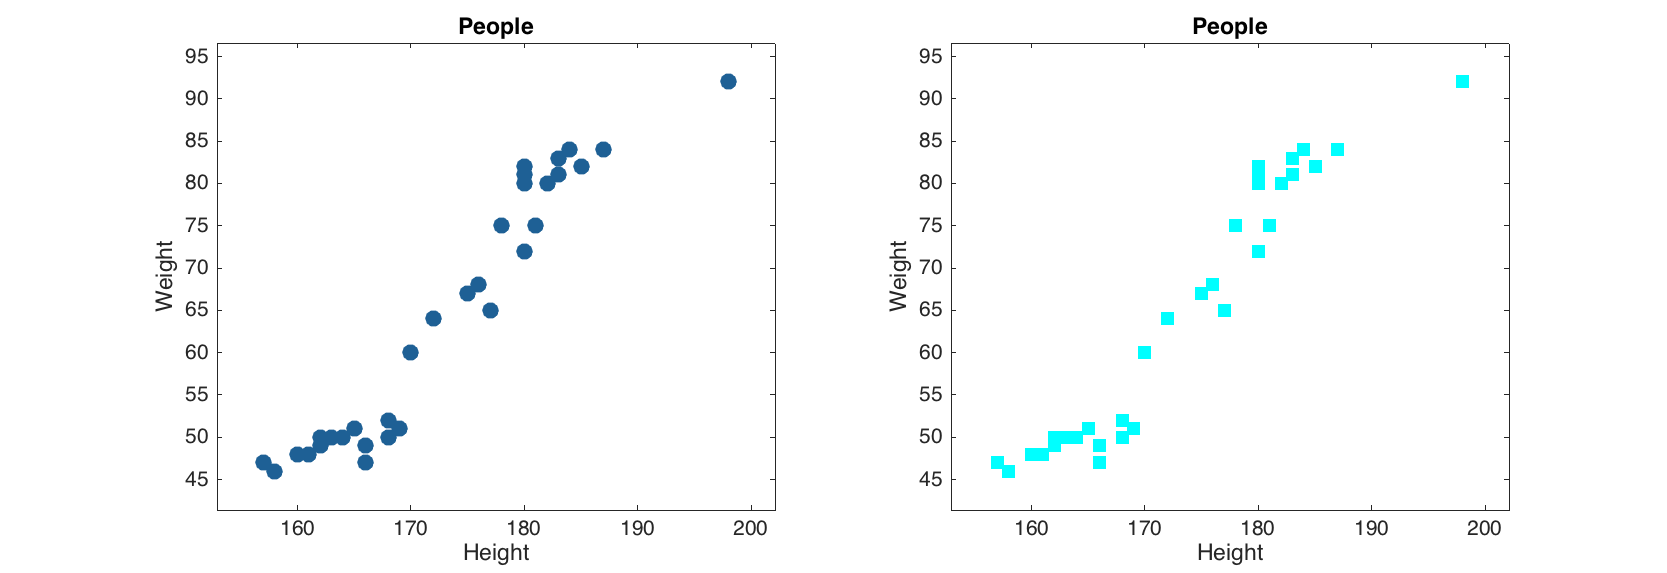 A simple scatter plot